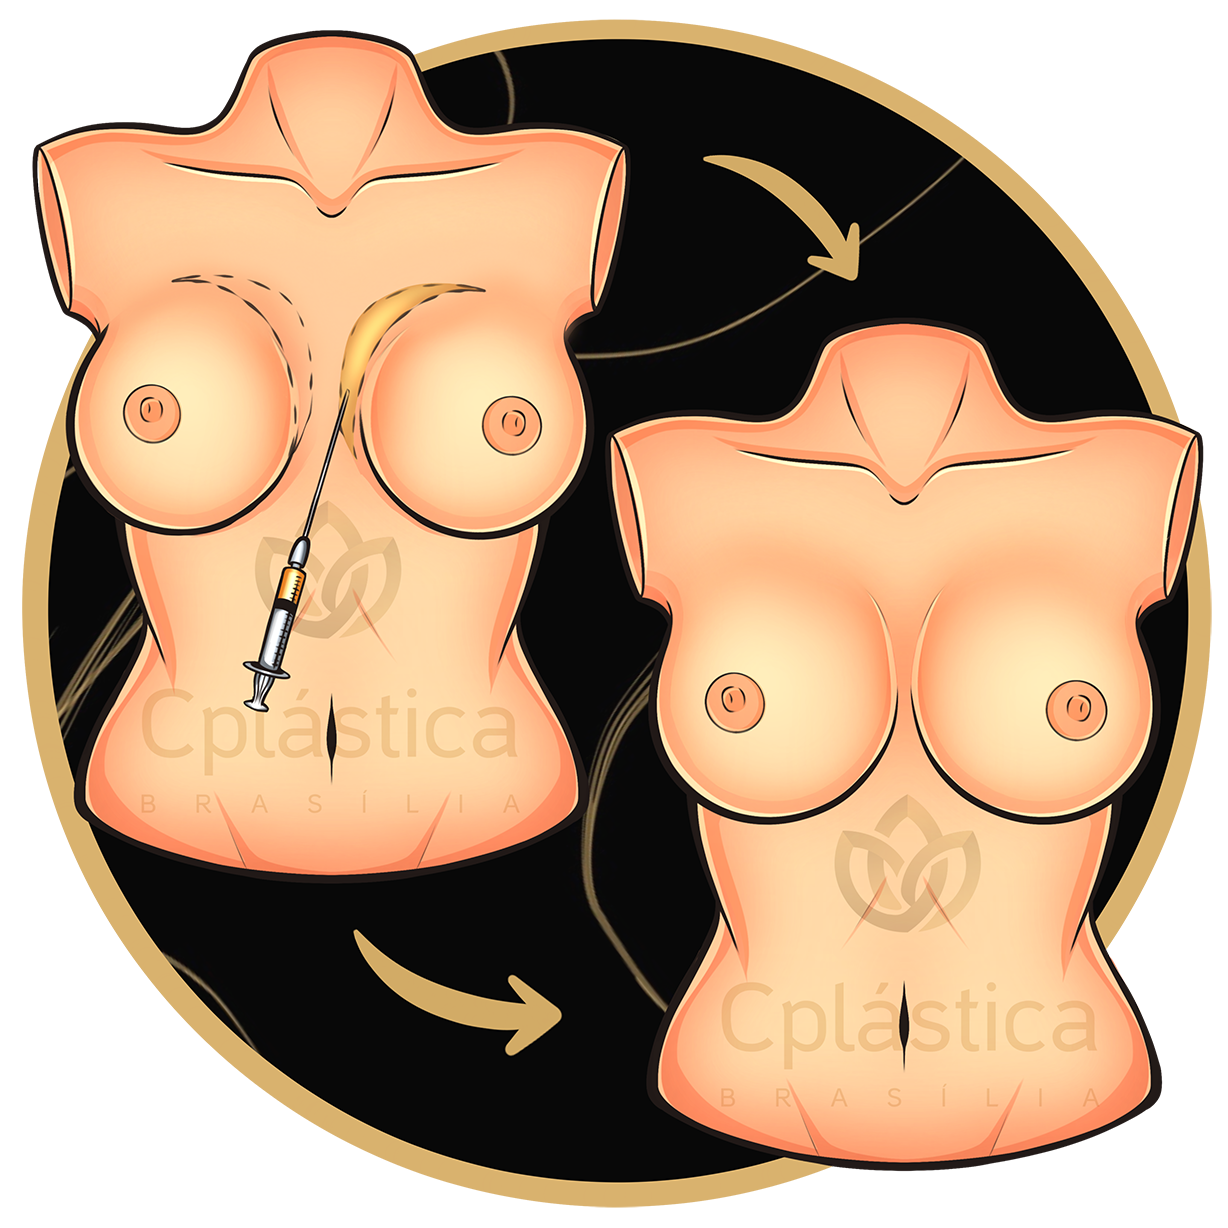 Hybrid or Composite Breast Surgery